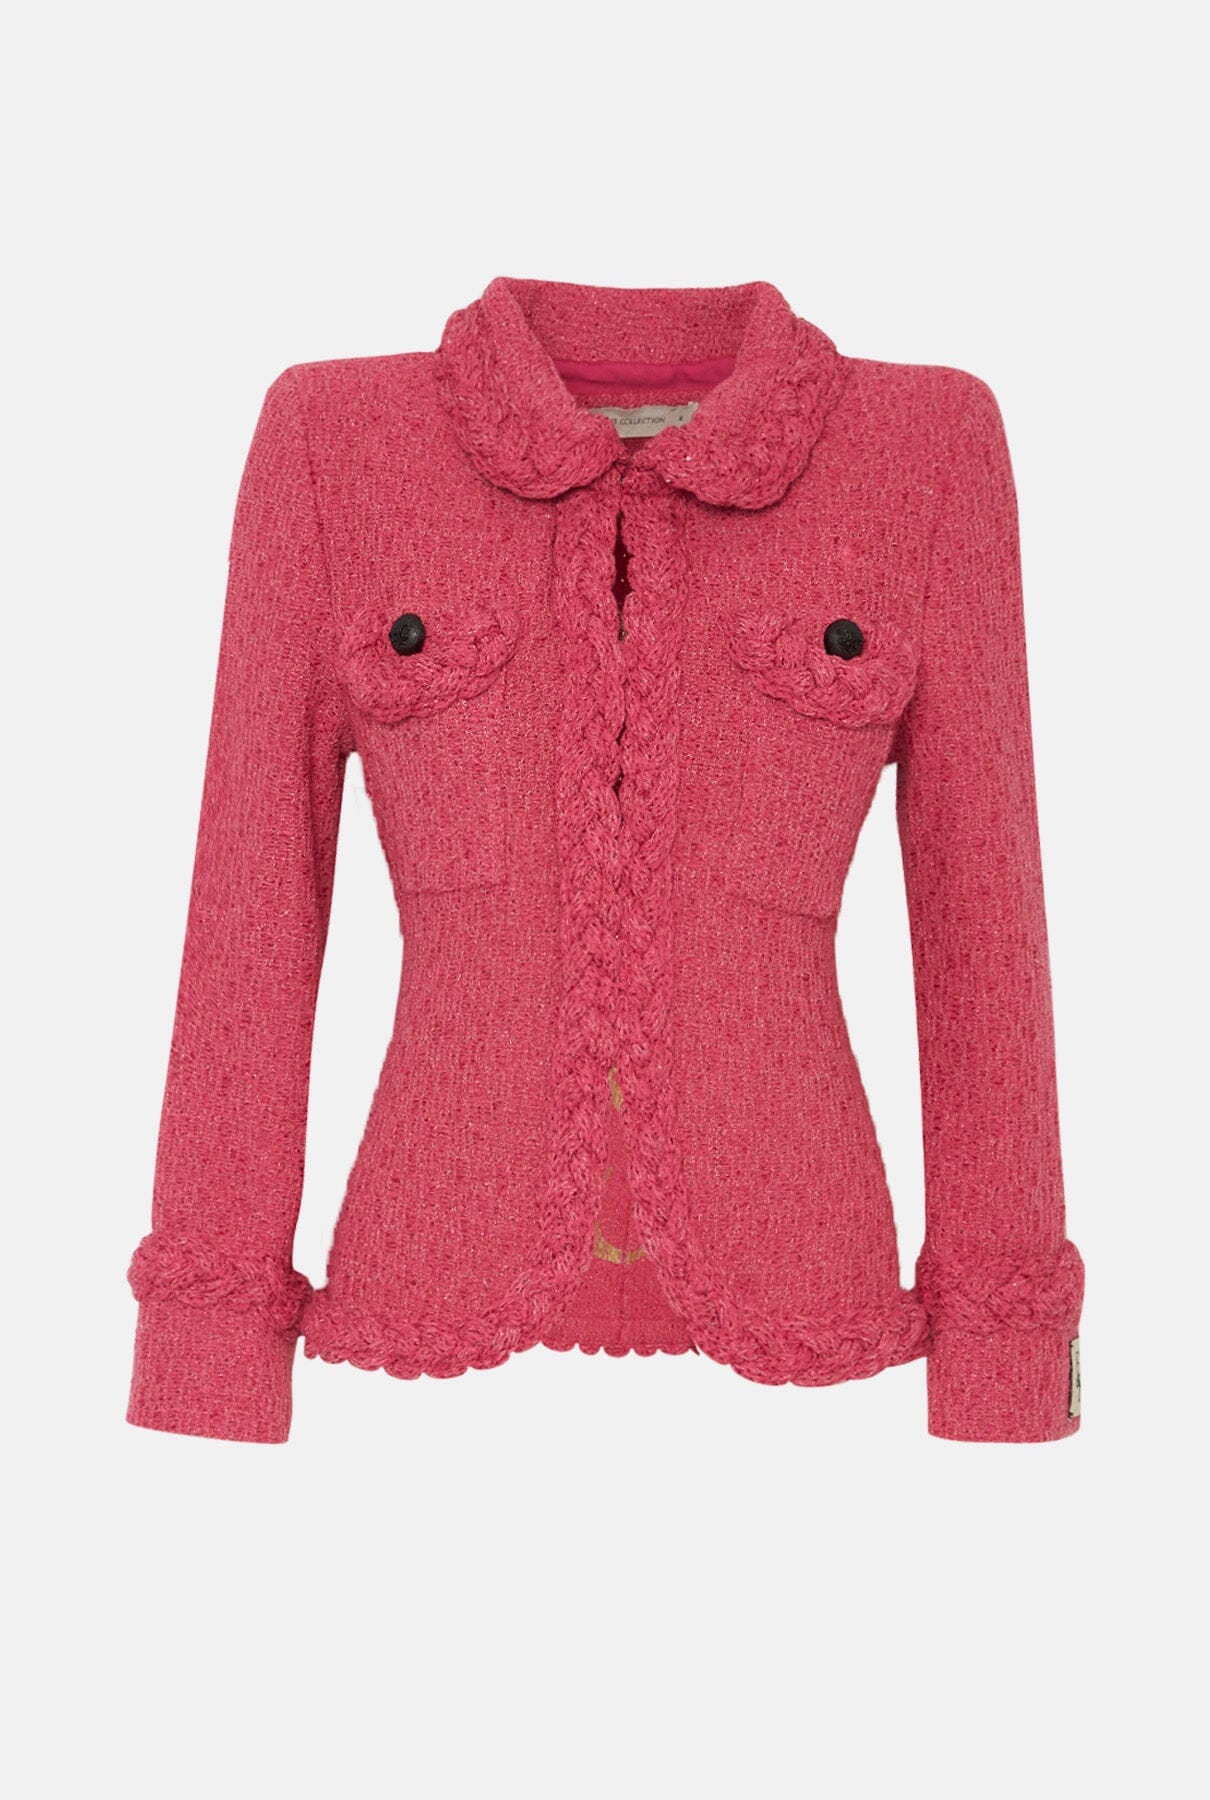 FUCHSIA TWEED JACKET AGNES Jackets The Extreme Collection 